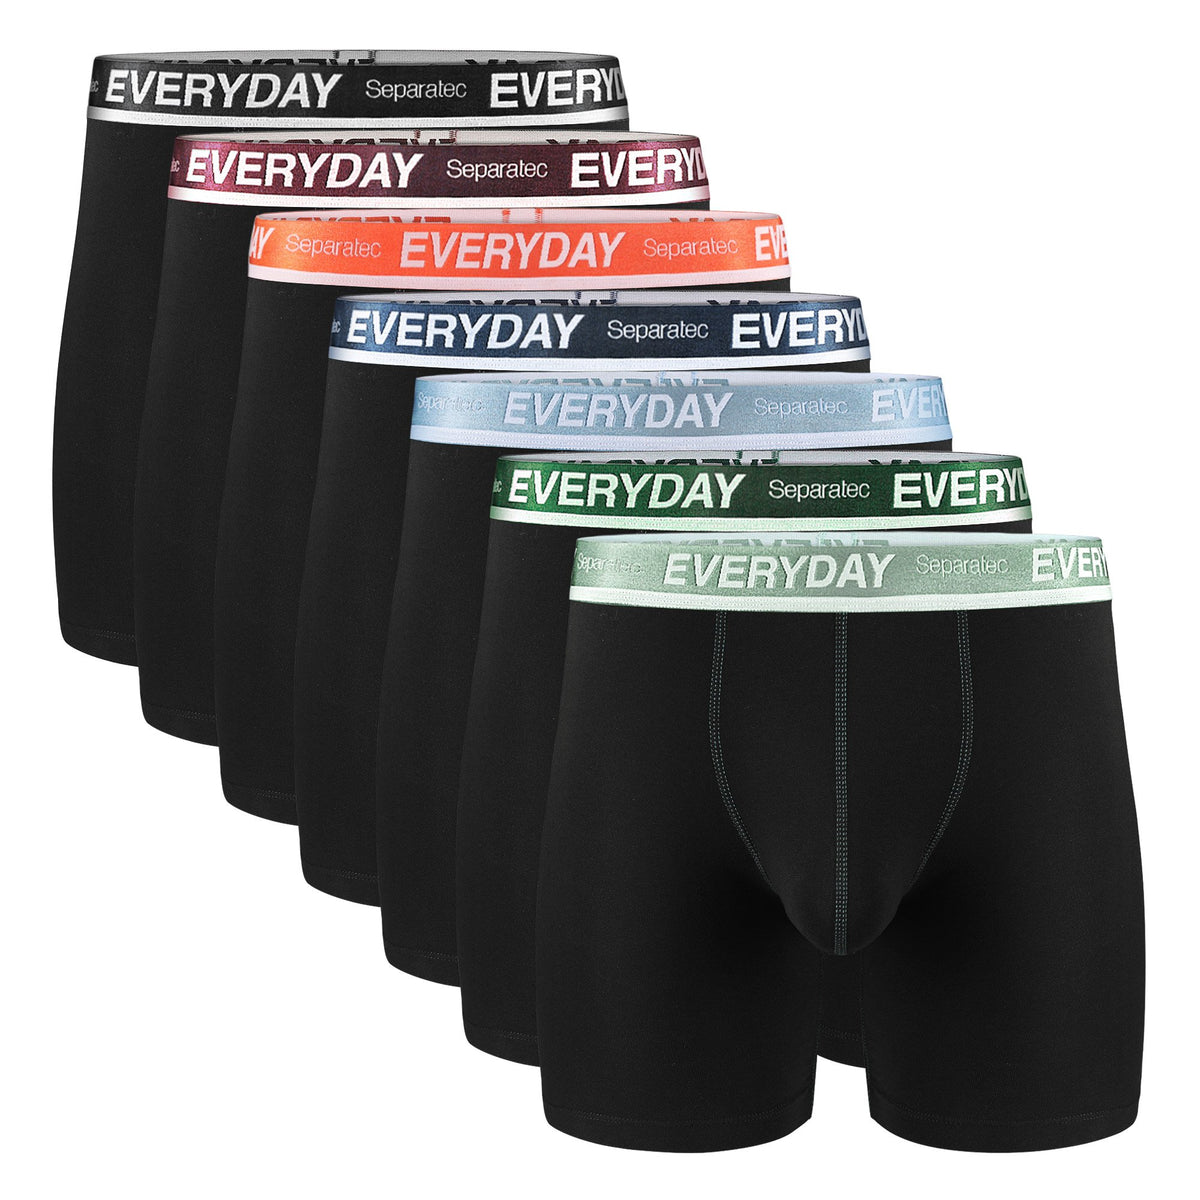 Separatec Classic One-Color-One-Day Cotton Boxers Make Itself an Intimate  Gift Idea This Holiday Season and Beyond, Business News - AsiaOne